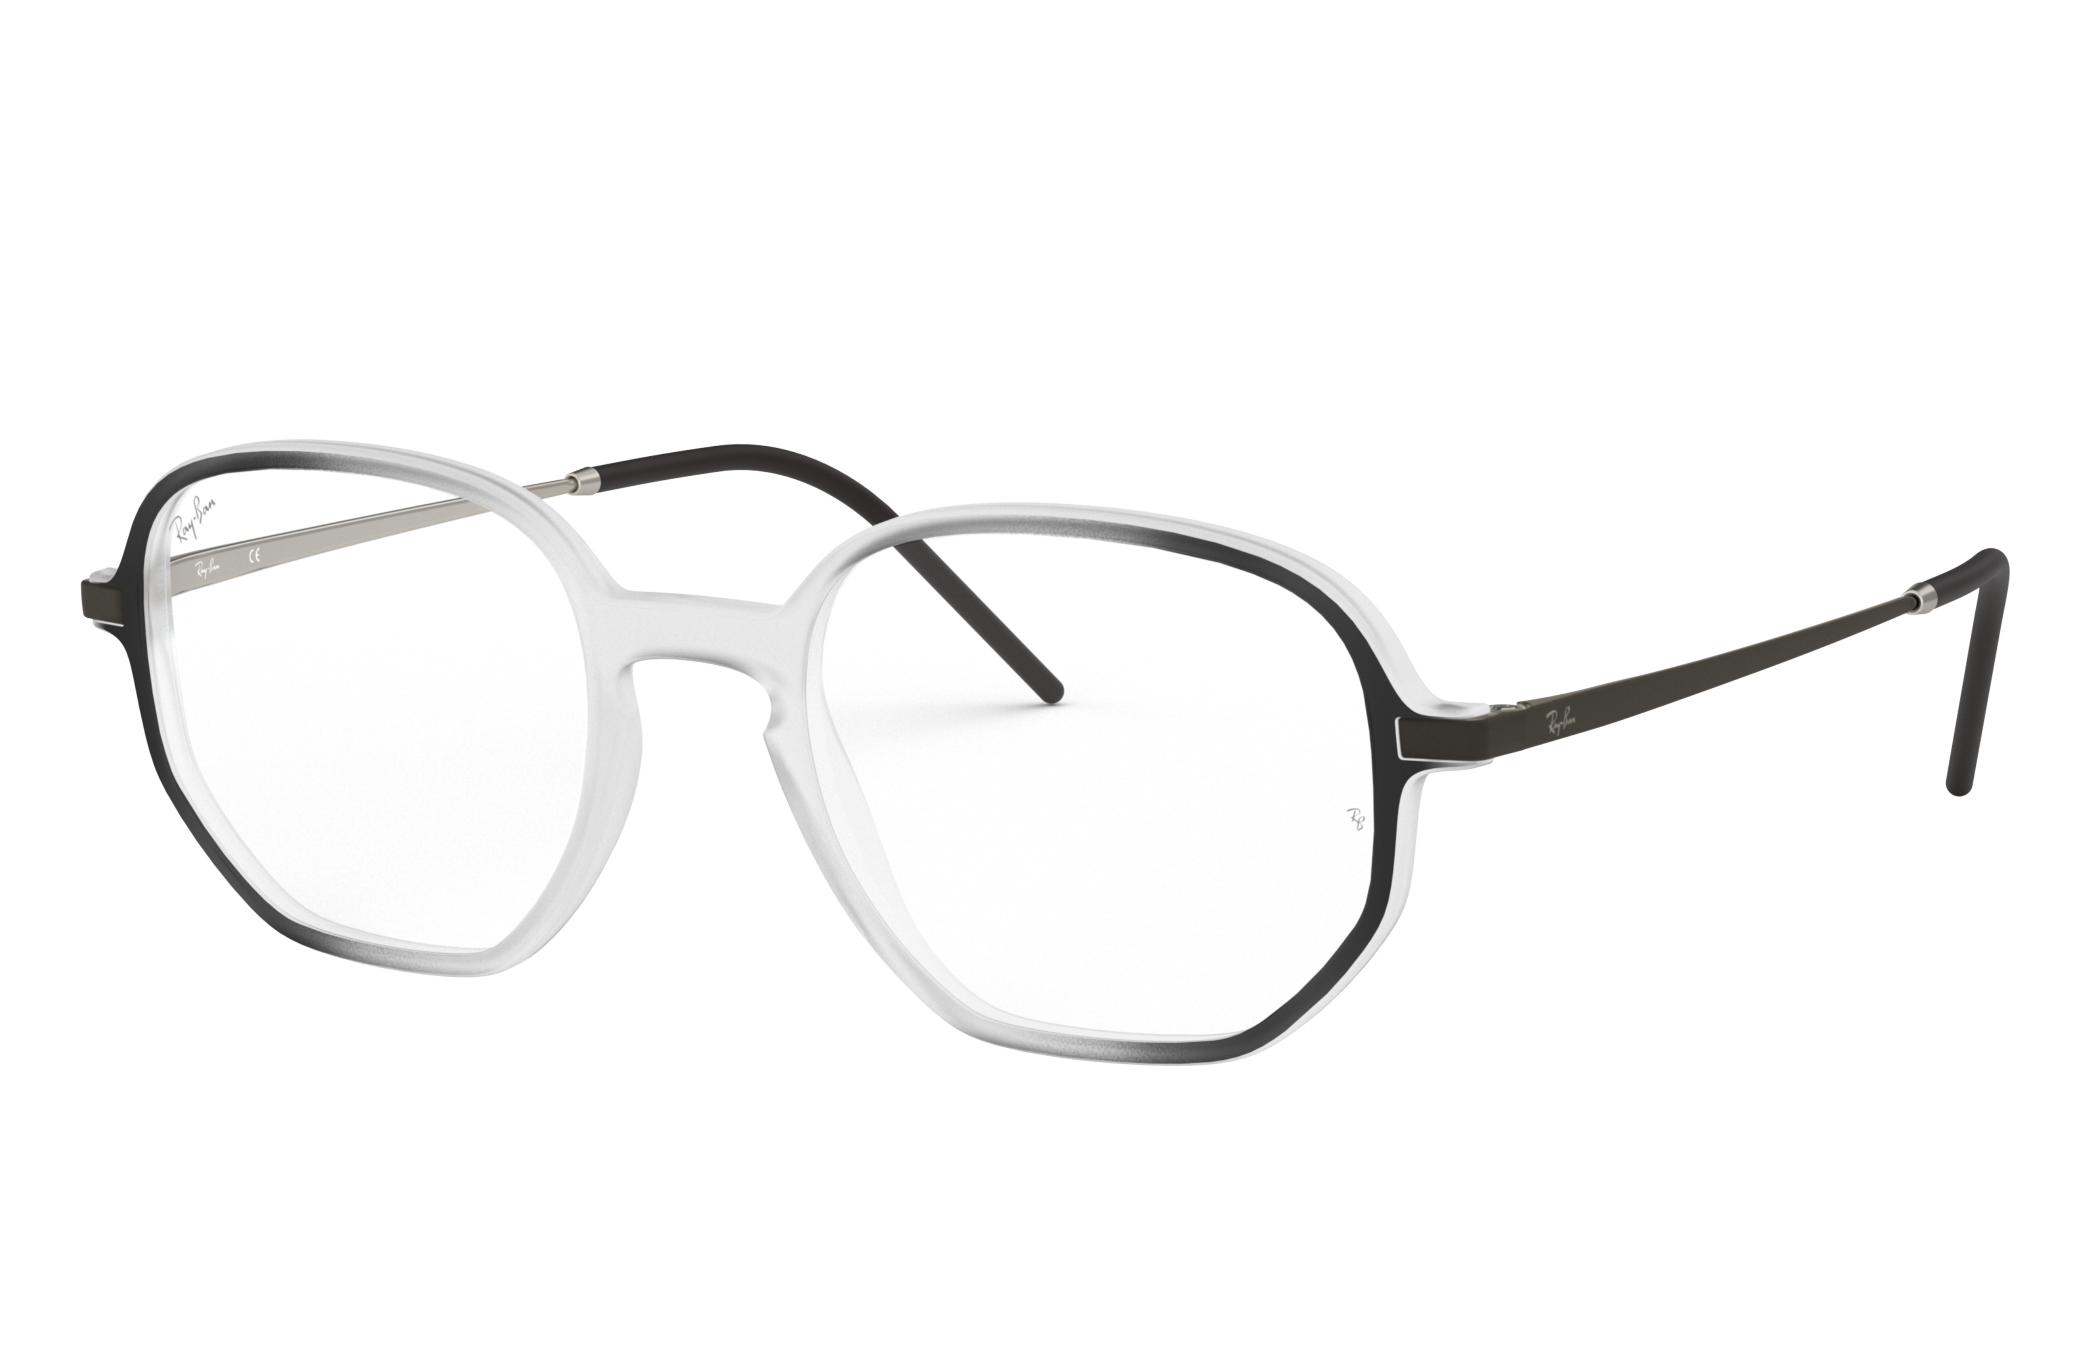 Rb7152 Eyeglasses with Transparent Frame | Ray-Ban®